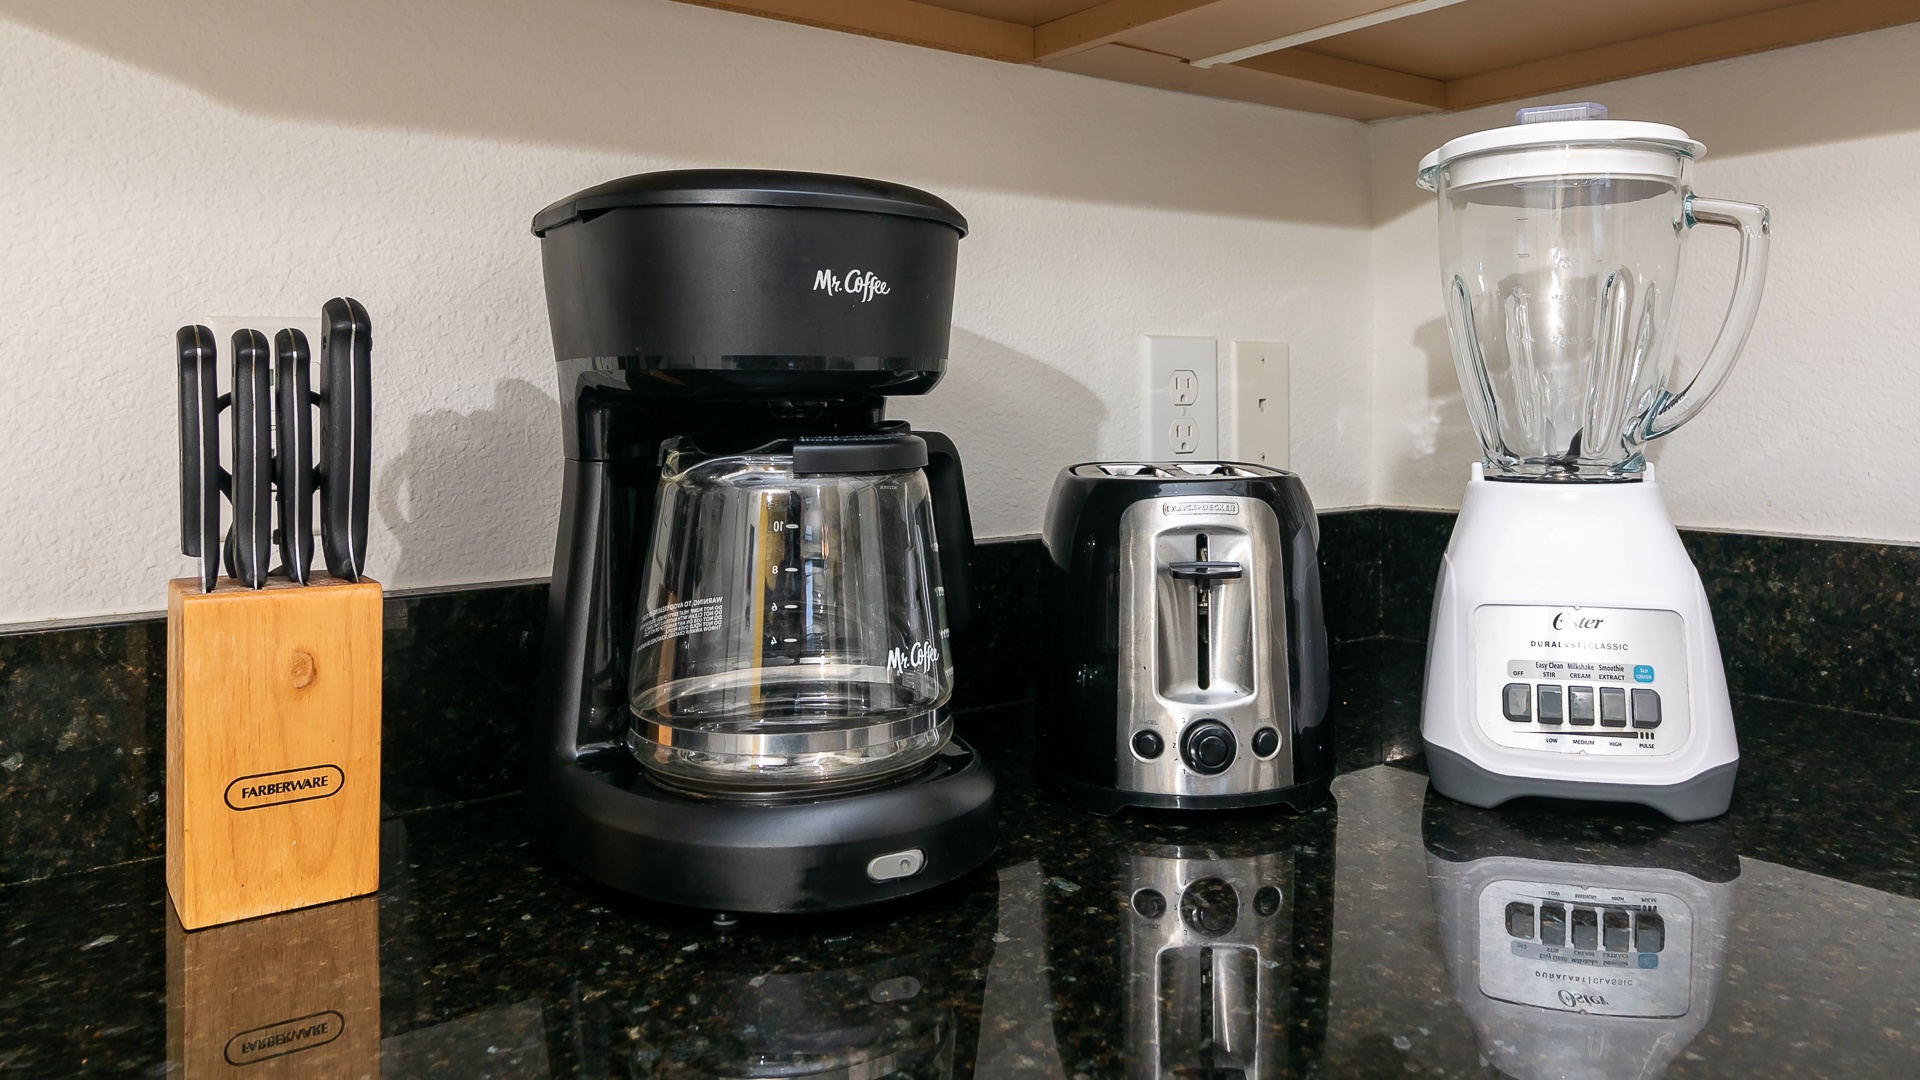 Drip Coffee Maker and Toaster